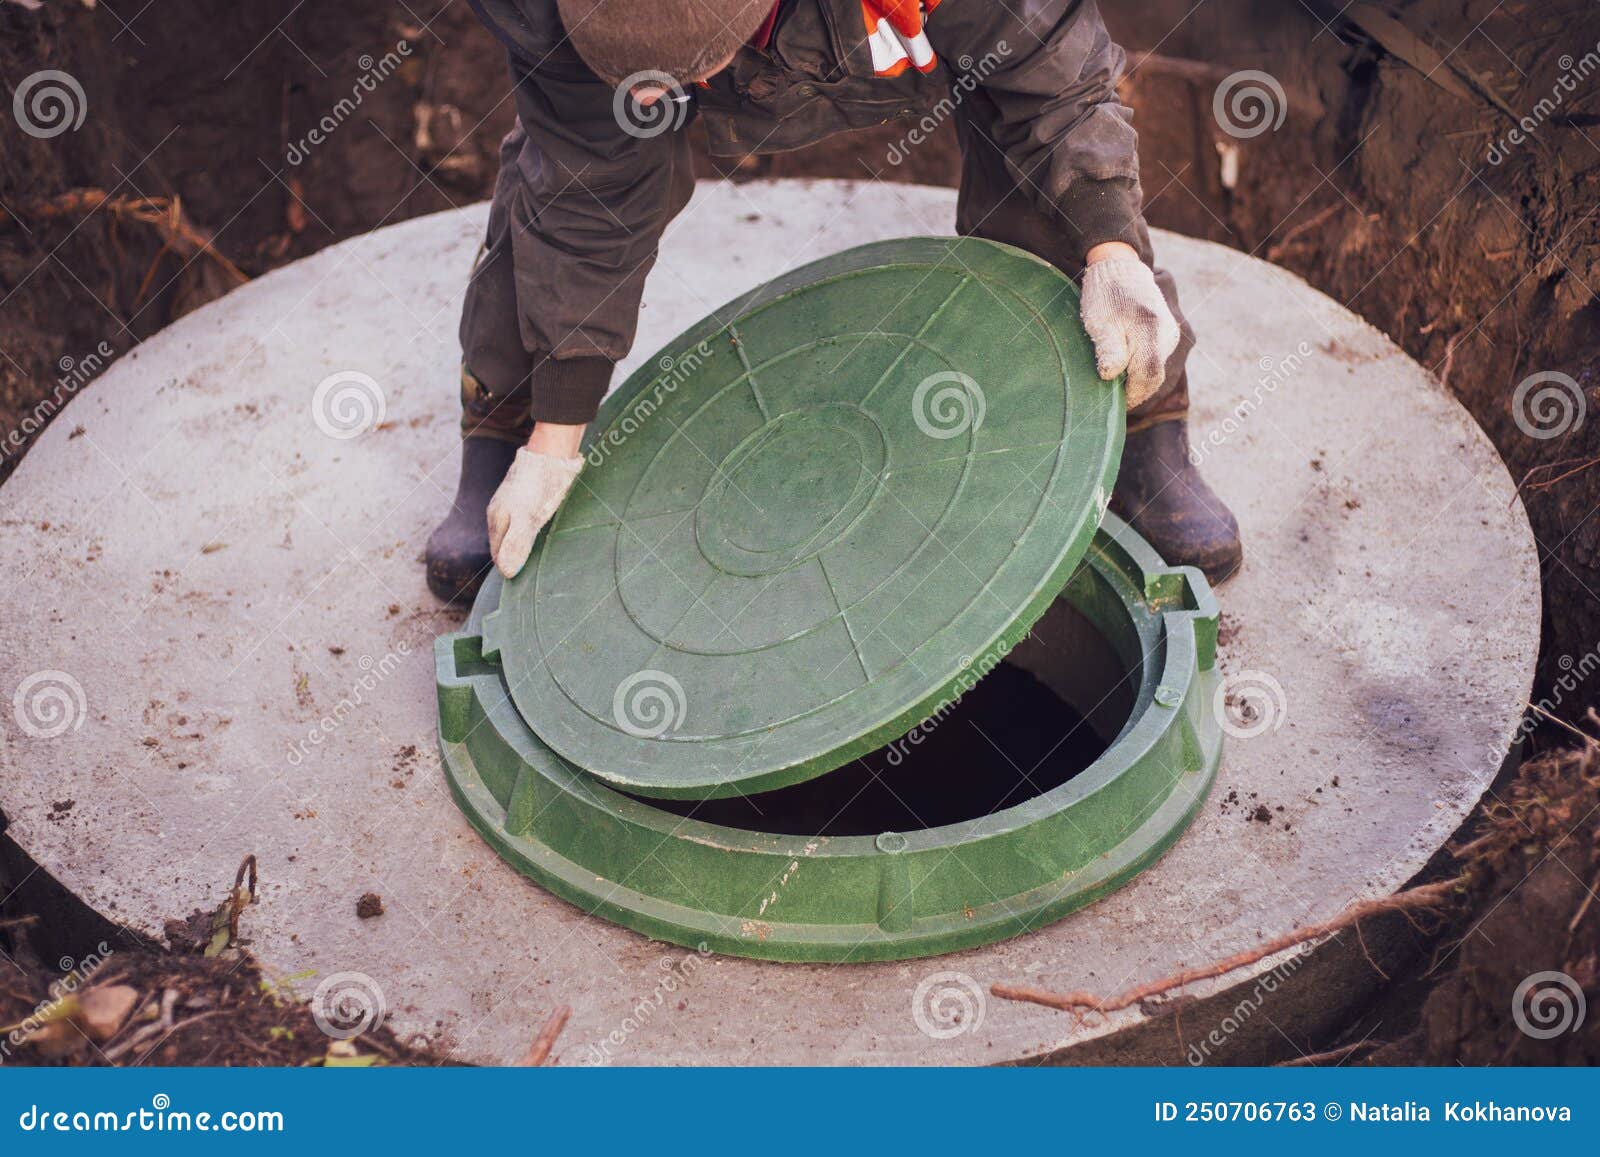 A Worker Lifts The Manhole Cover Of A Sewer Well. Construction And ...